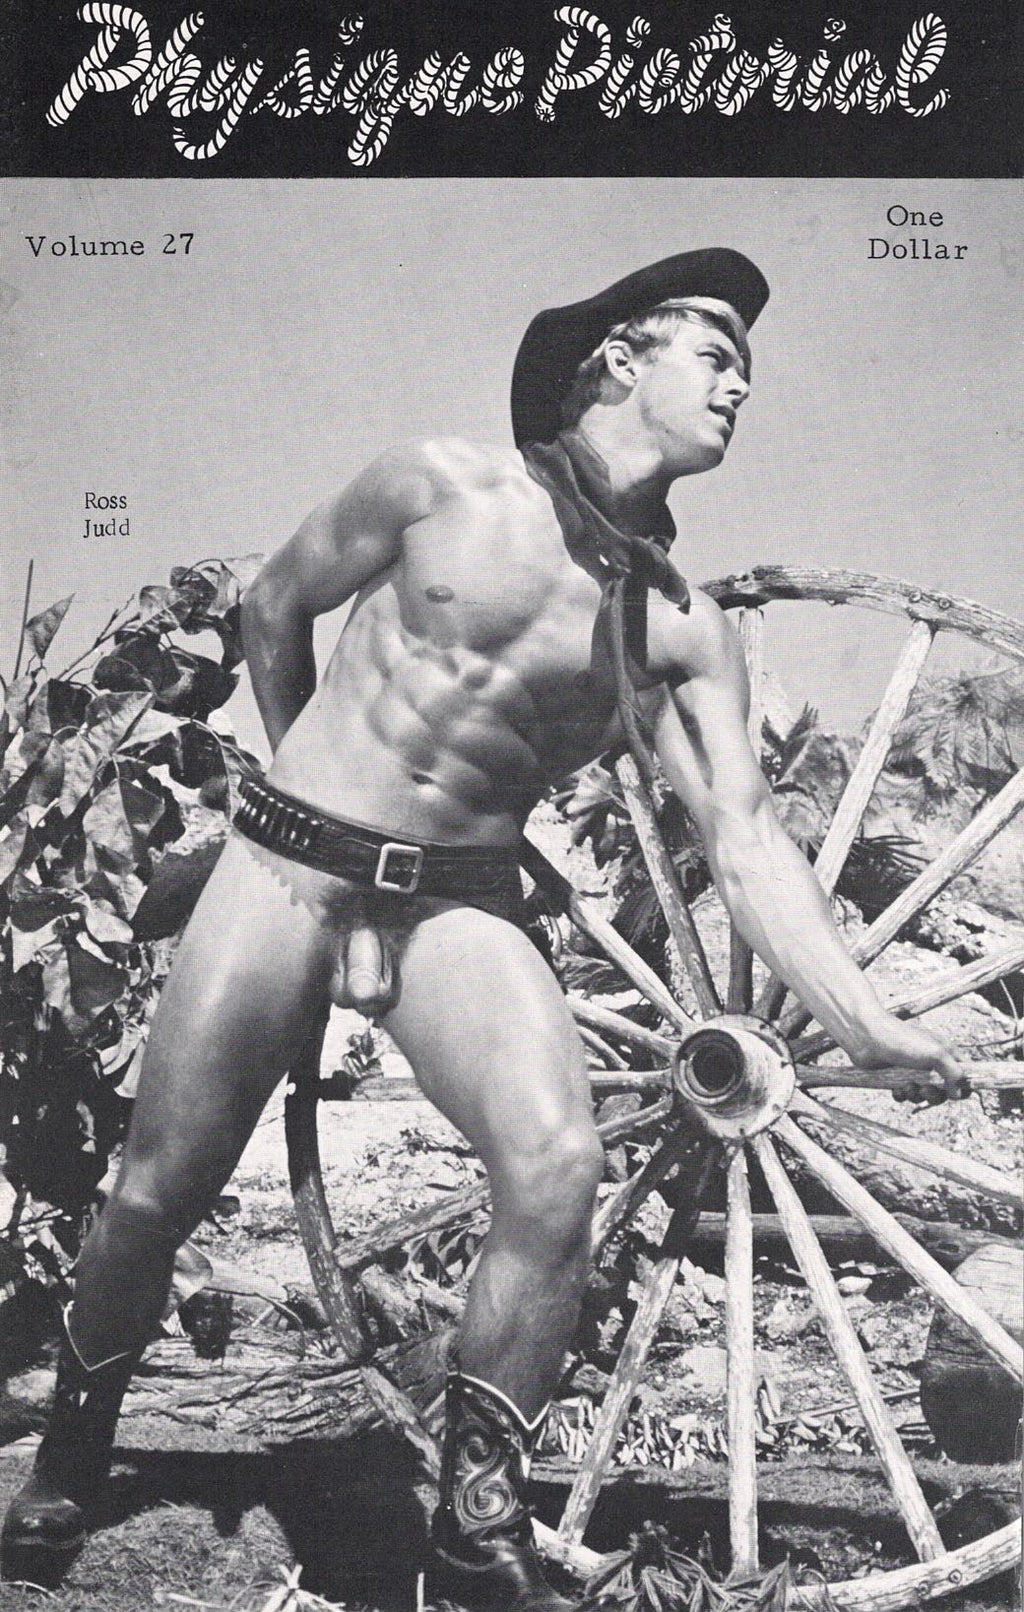 Vintage Physique Pictorial - Volume 27 Issue 1